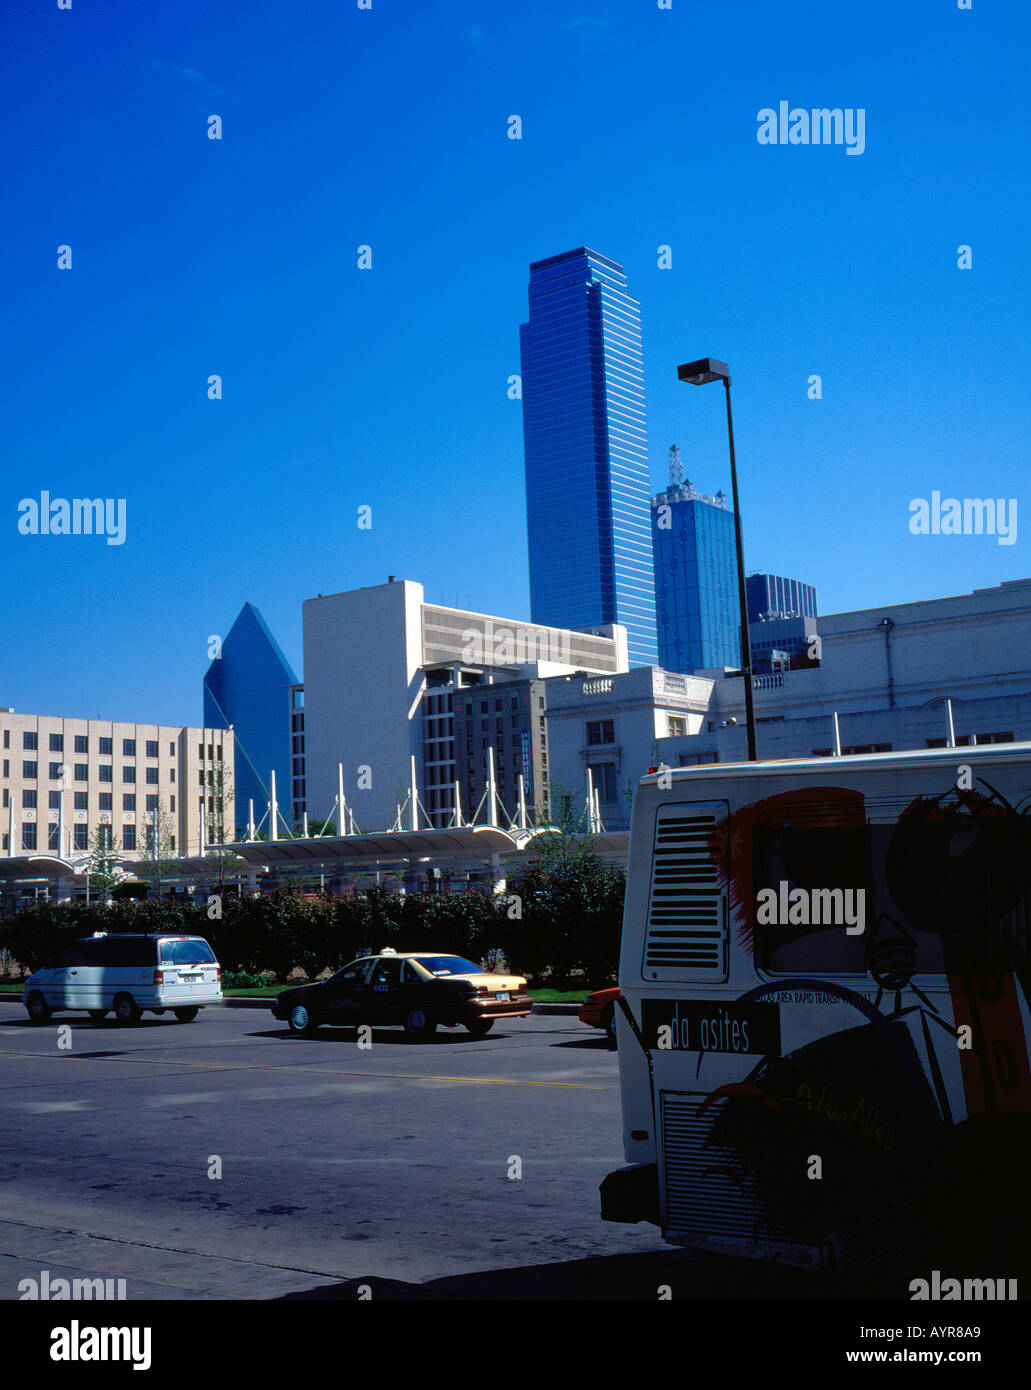 Fort Worth Texas USA. Photo by Willy Matheisl Stock Photo